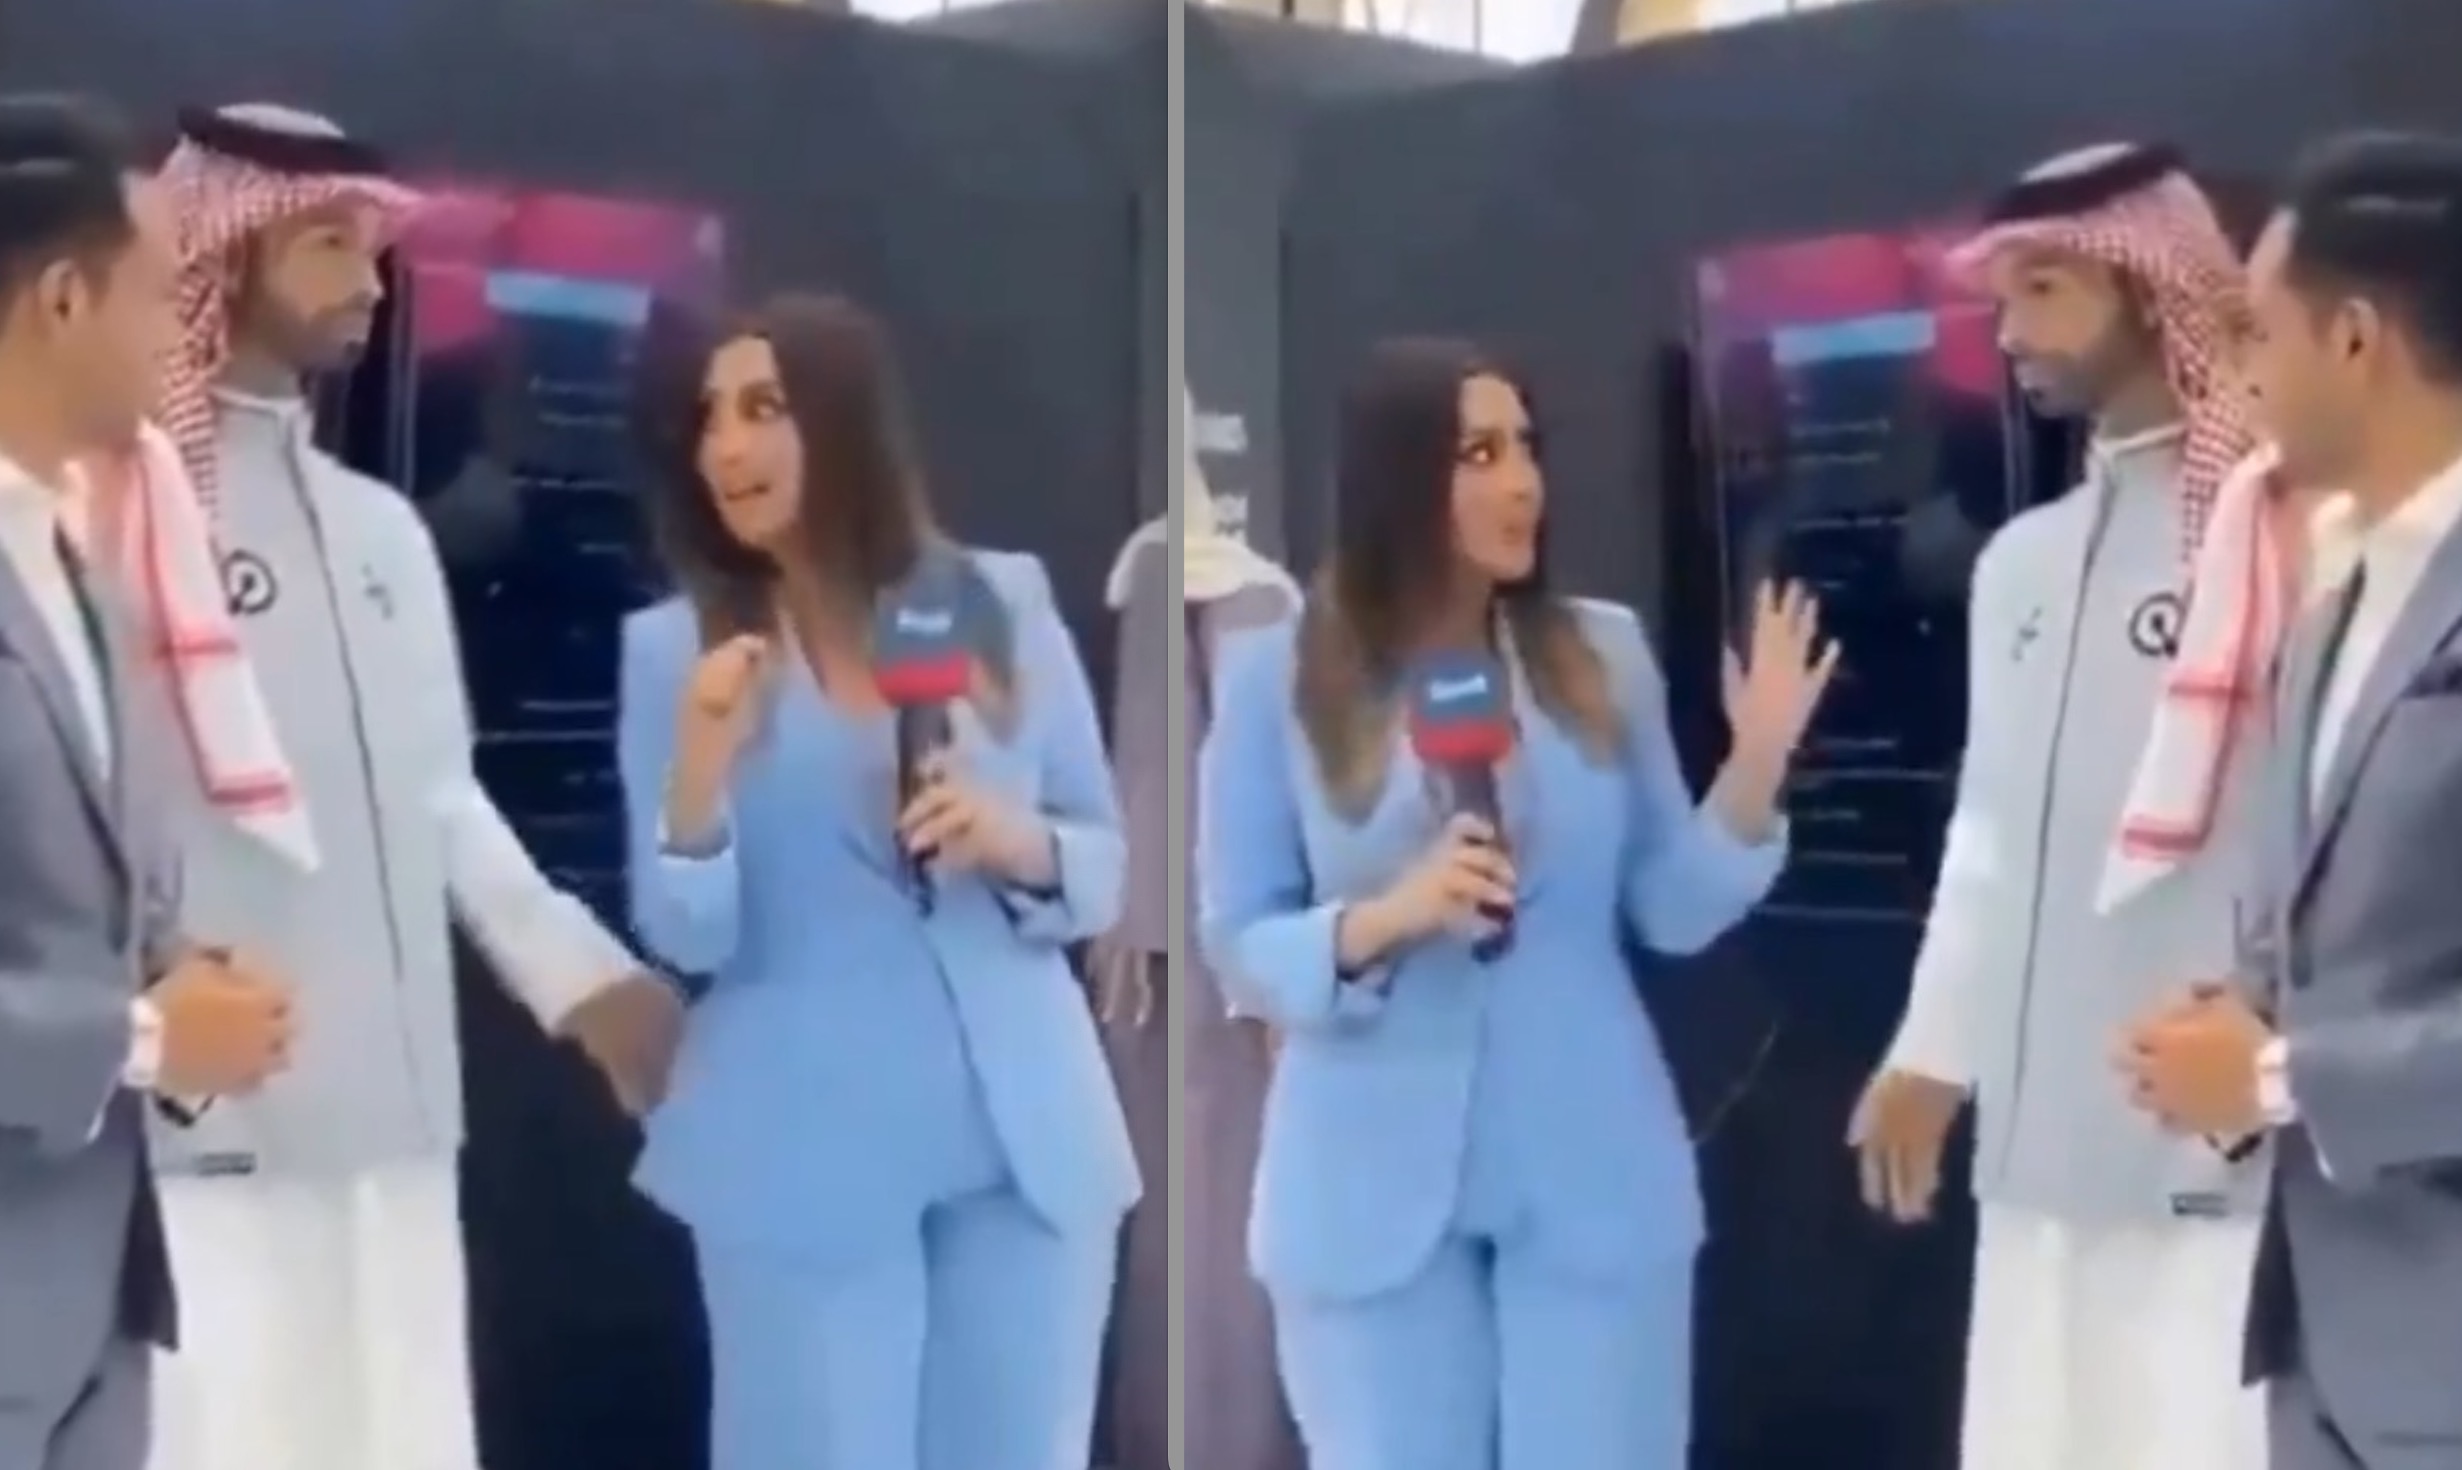 Male Humanoid Robot Touches Woman 'Inappropriately' in Saudi Arabia - Video